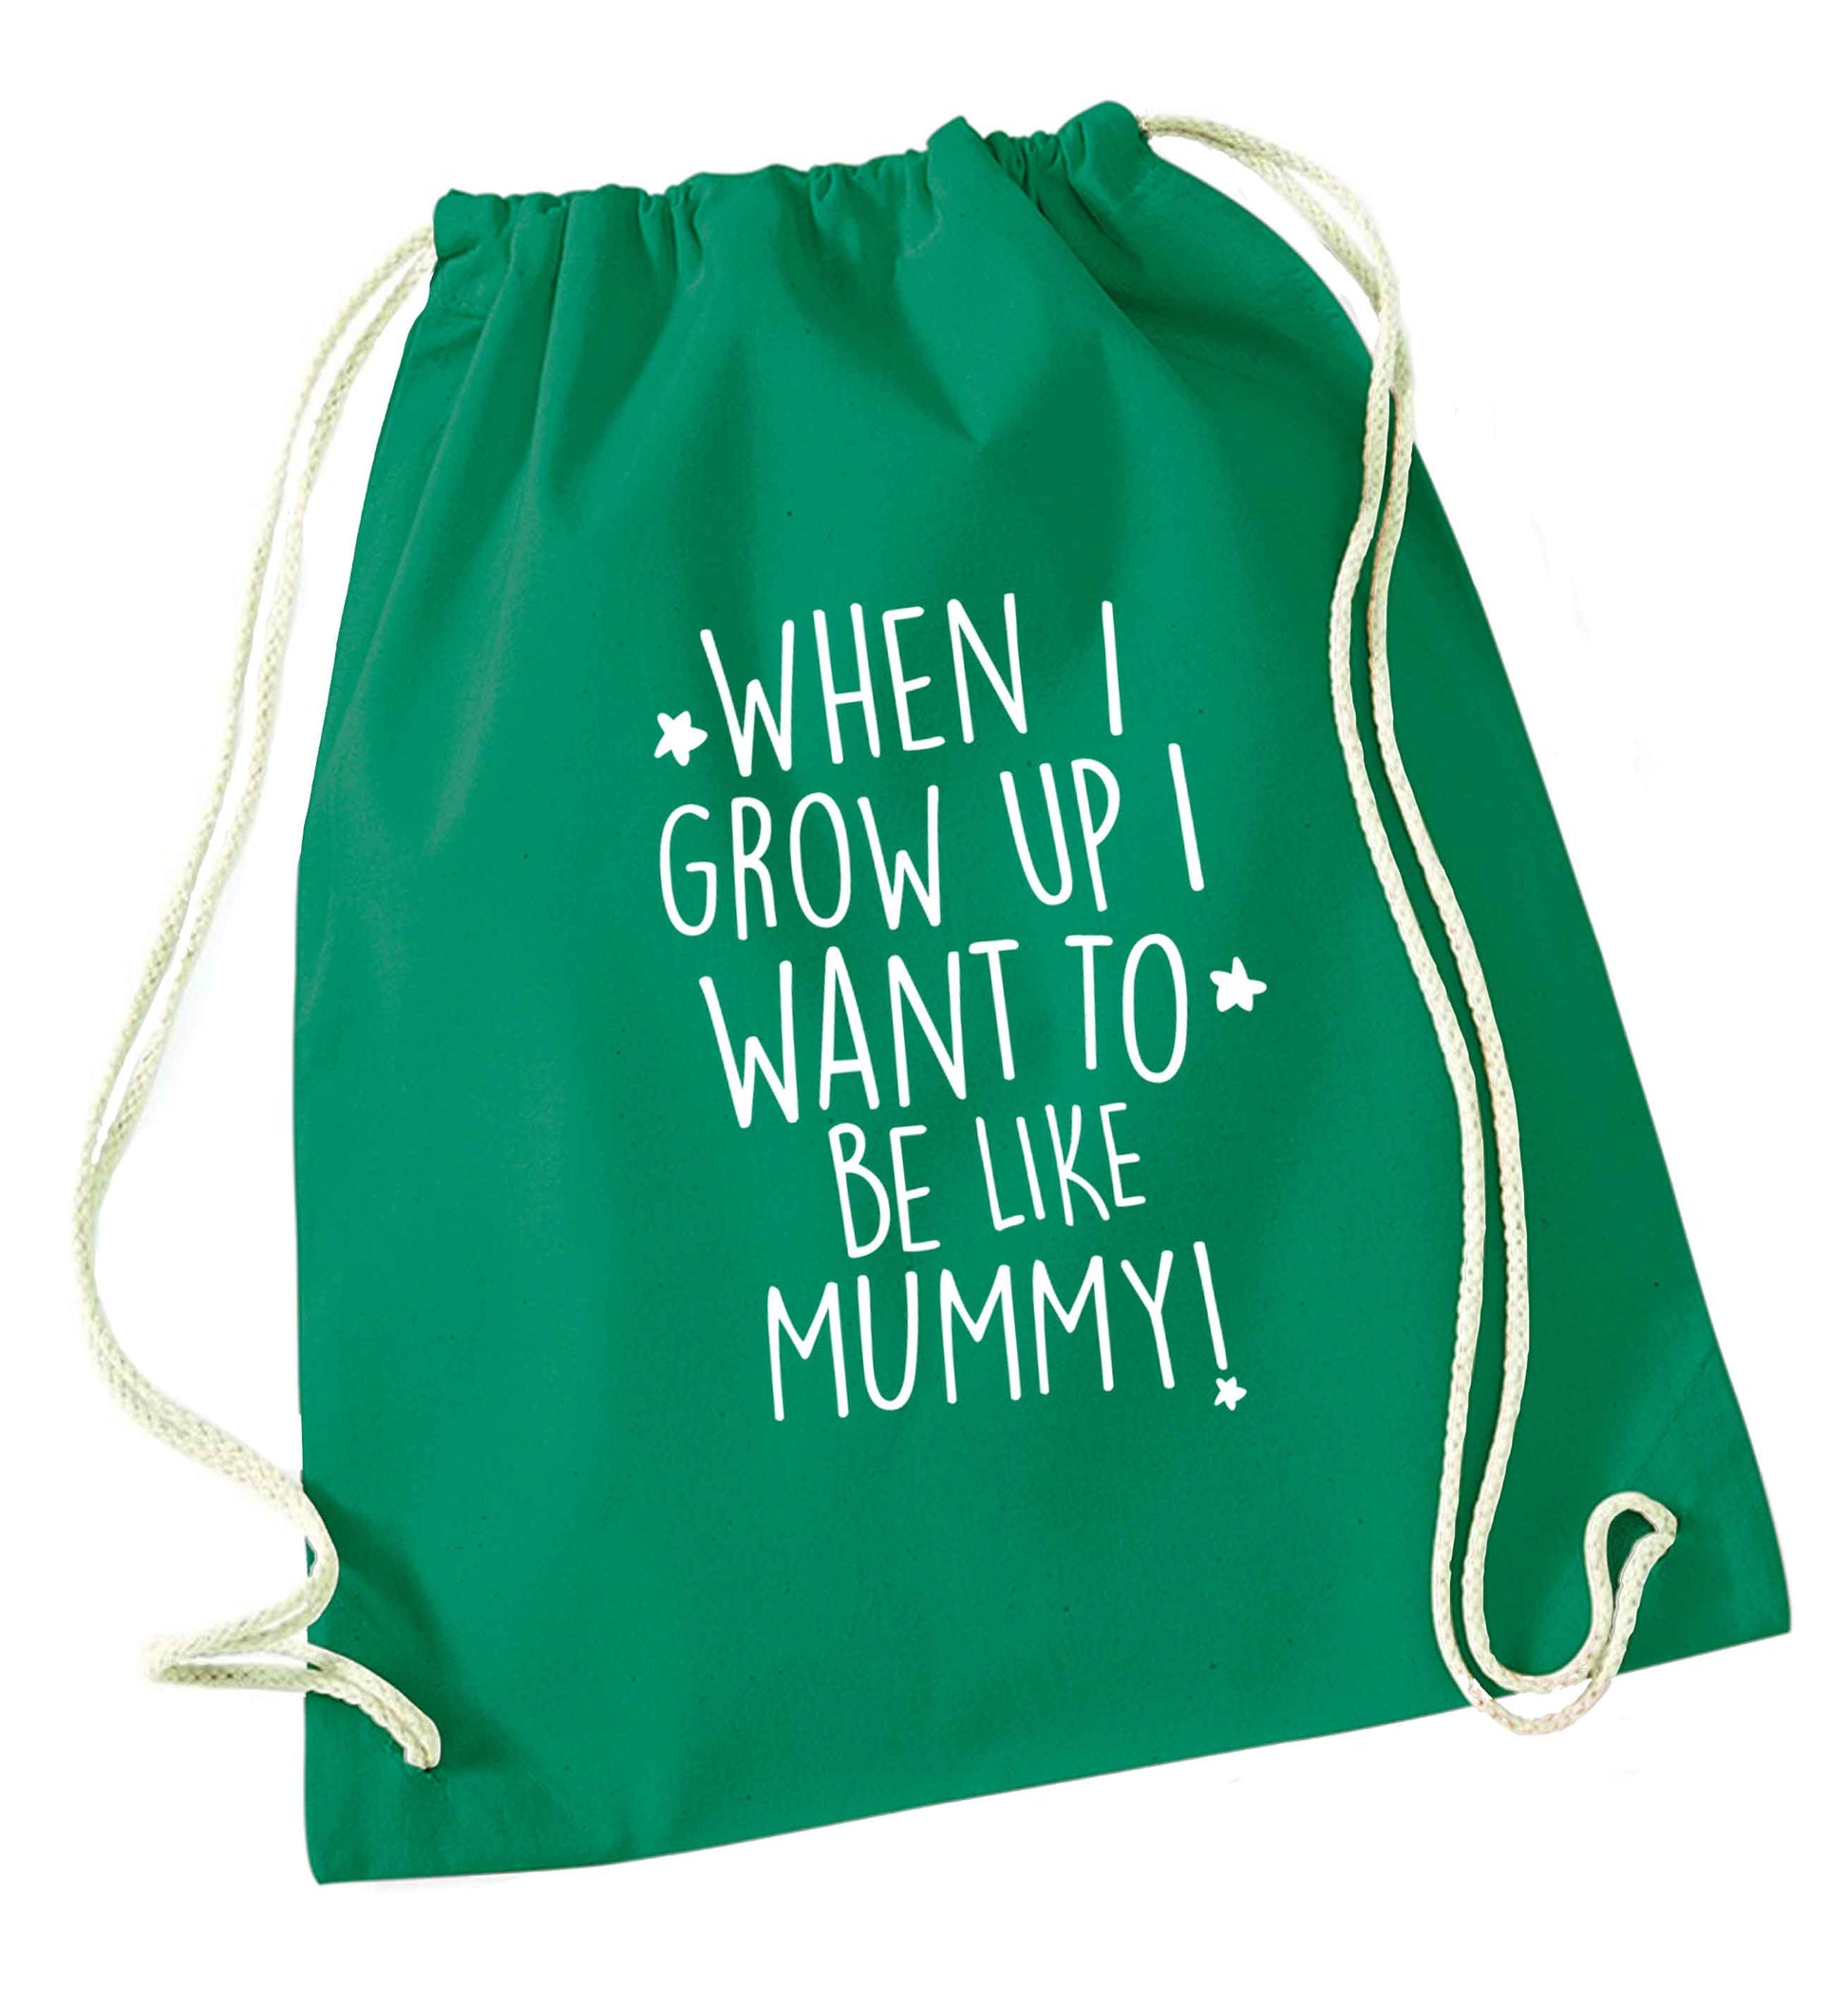 When I grow up I want to be like my mummy green drawstring bag